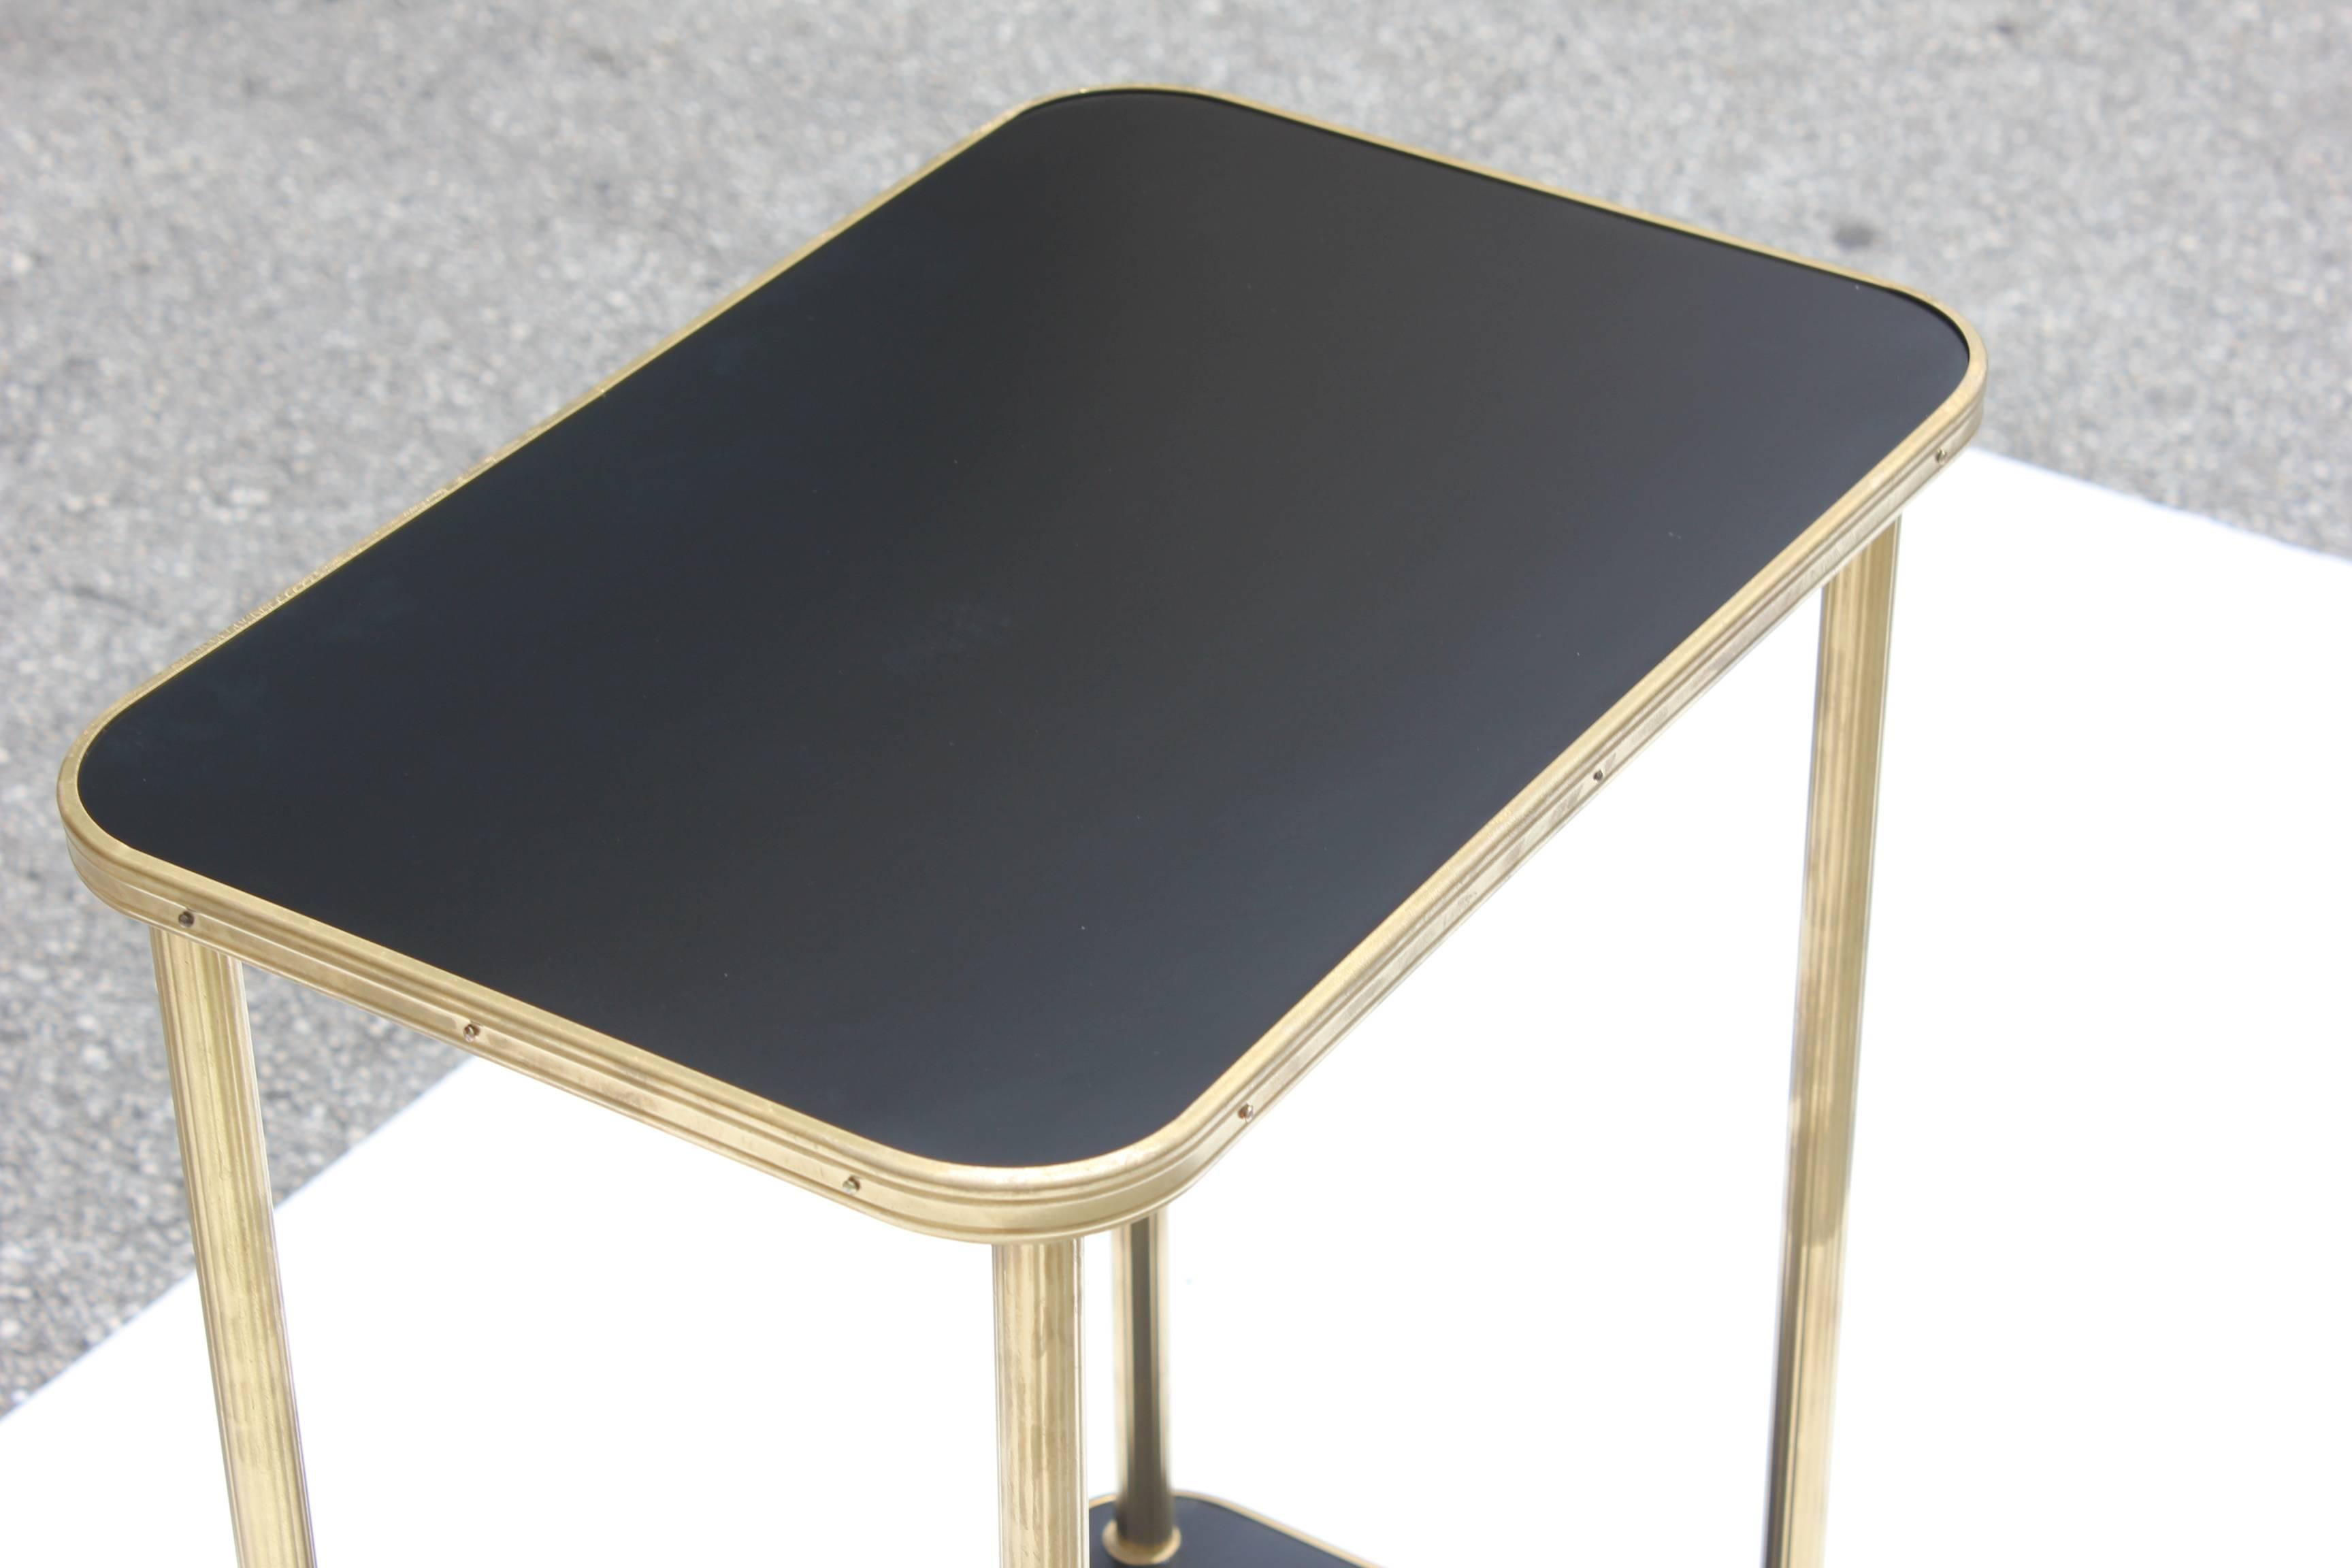 Mid-20th Century French Art Deco Side Table or End Table by Maison Jansen, circa 1940s